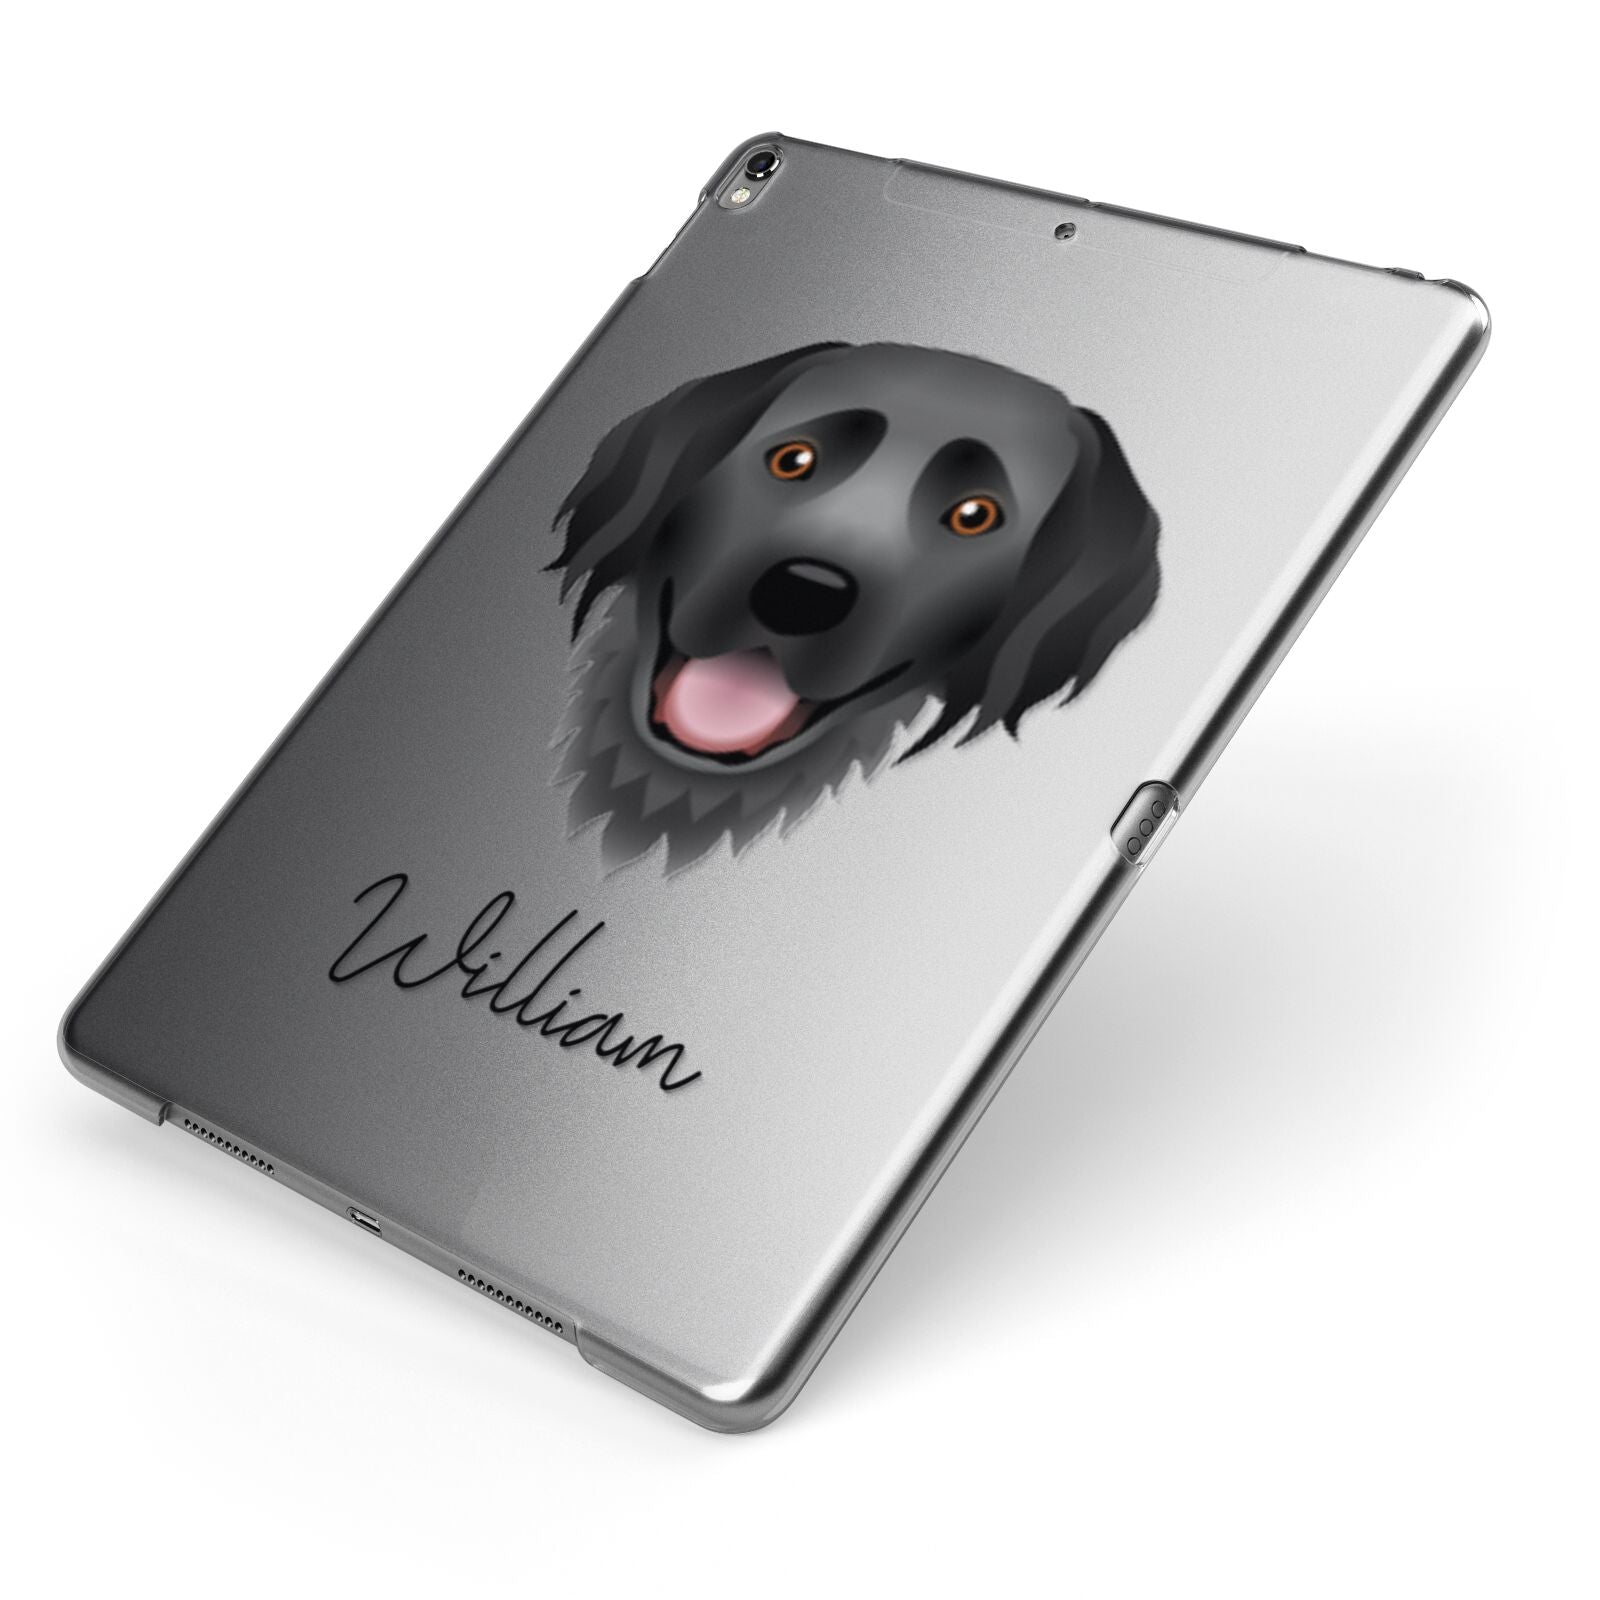 Hovawart Personalised Apple iPad Case on Grey iPad Side View